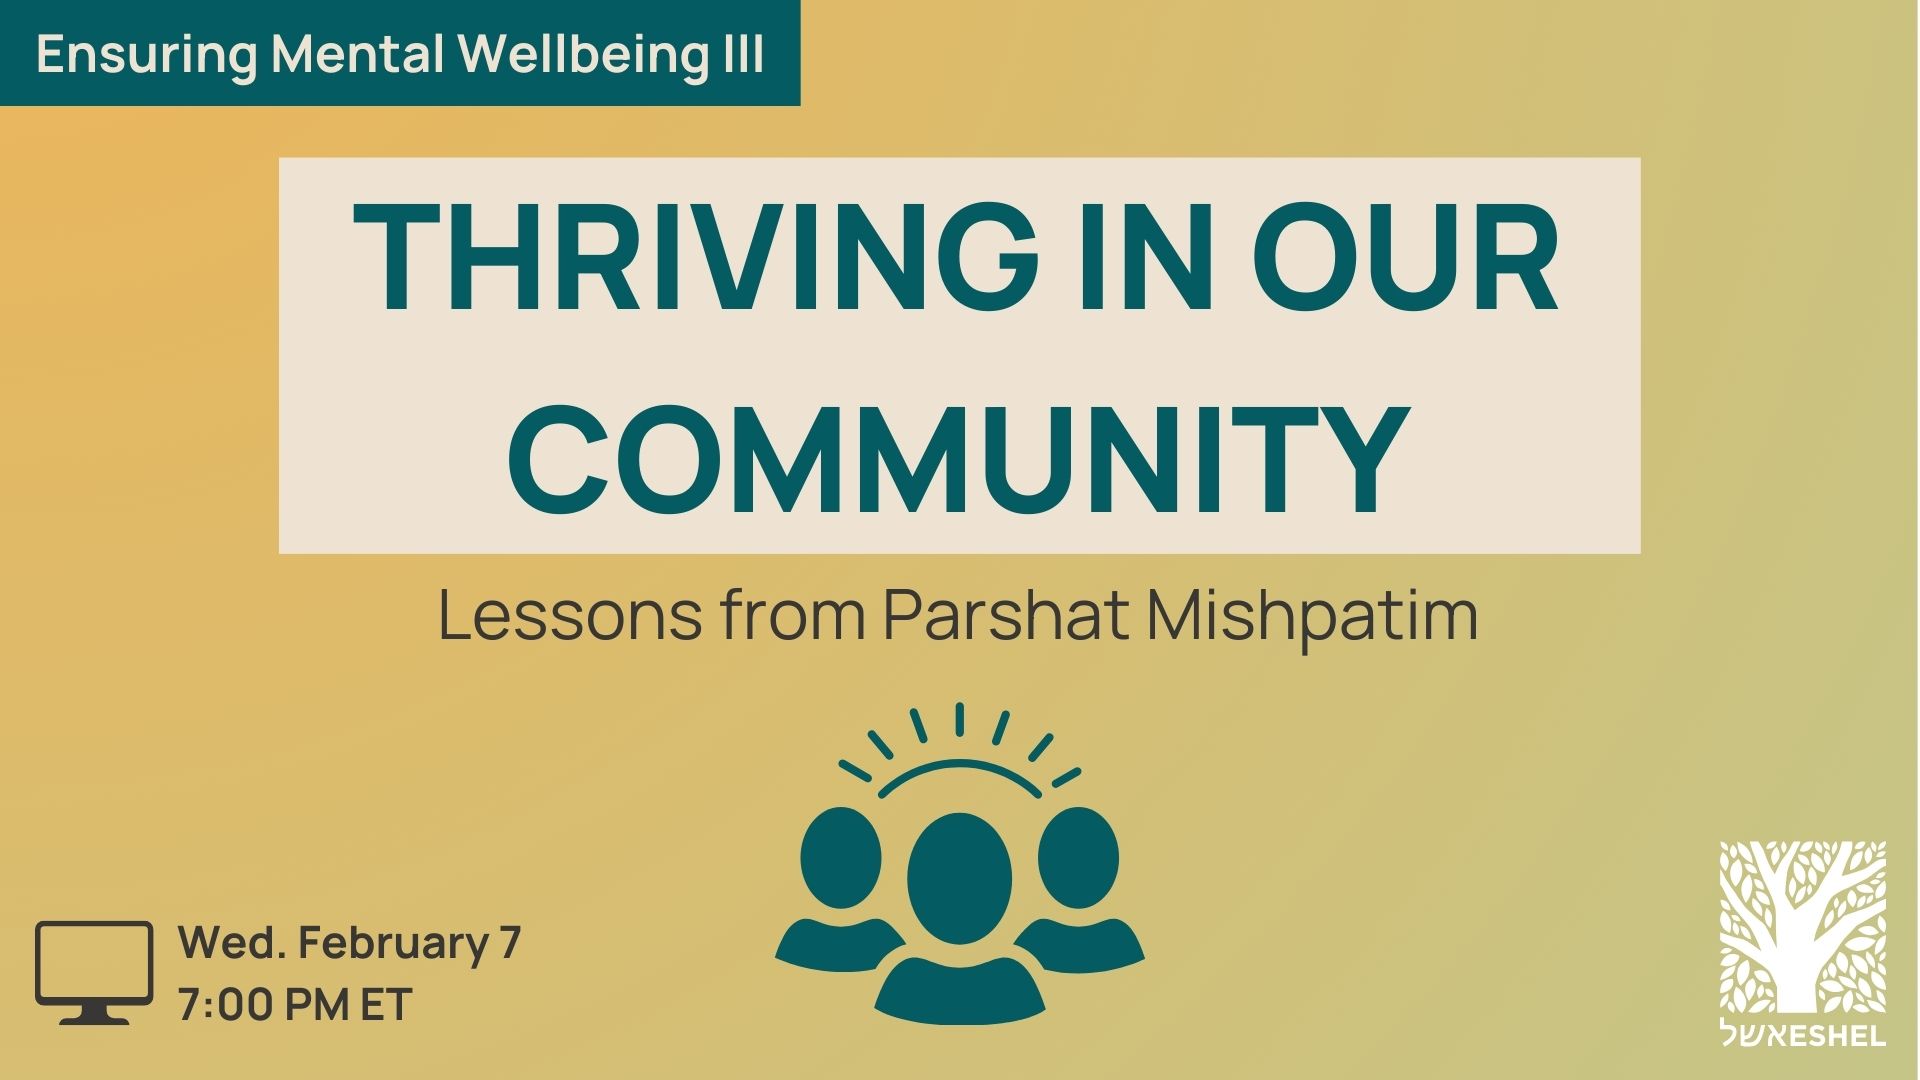 Mental Wellbeing III | Thriving in Our Community: Lessons from Parshat Mishpatim | Wed. February 7, 7:00 pm ET